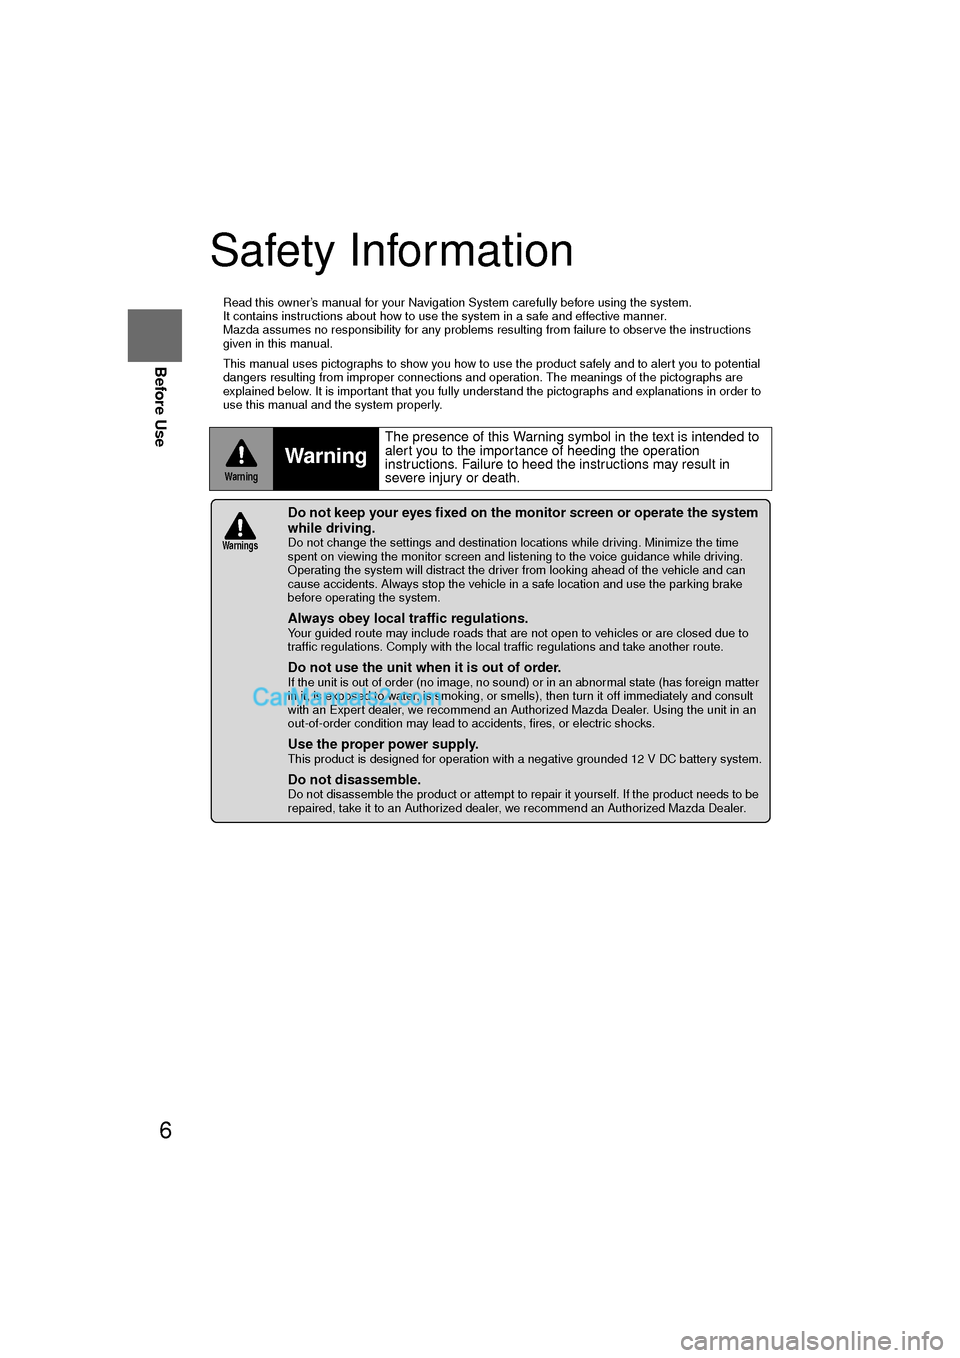 MAZDA MODEL CX-9 2010  Navigation Manual (in English) 6
Before Use
Navigation 
Set Up
RDM-TMCIf
necessary
Rear View 
Monitor
Safety Information
n
Read this owner’s manual for your Navigation System carefully before using the system. 
It contains instru